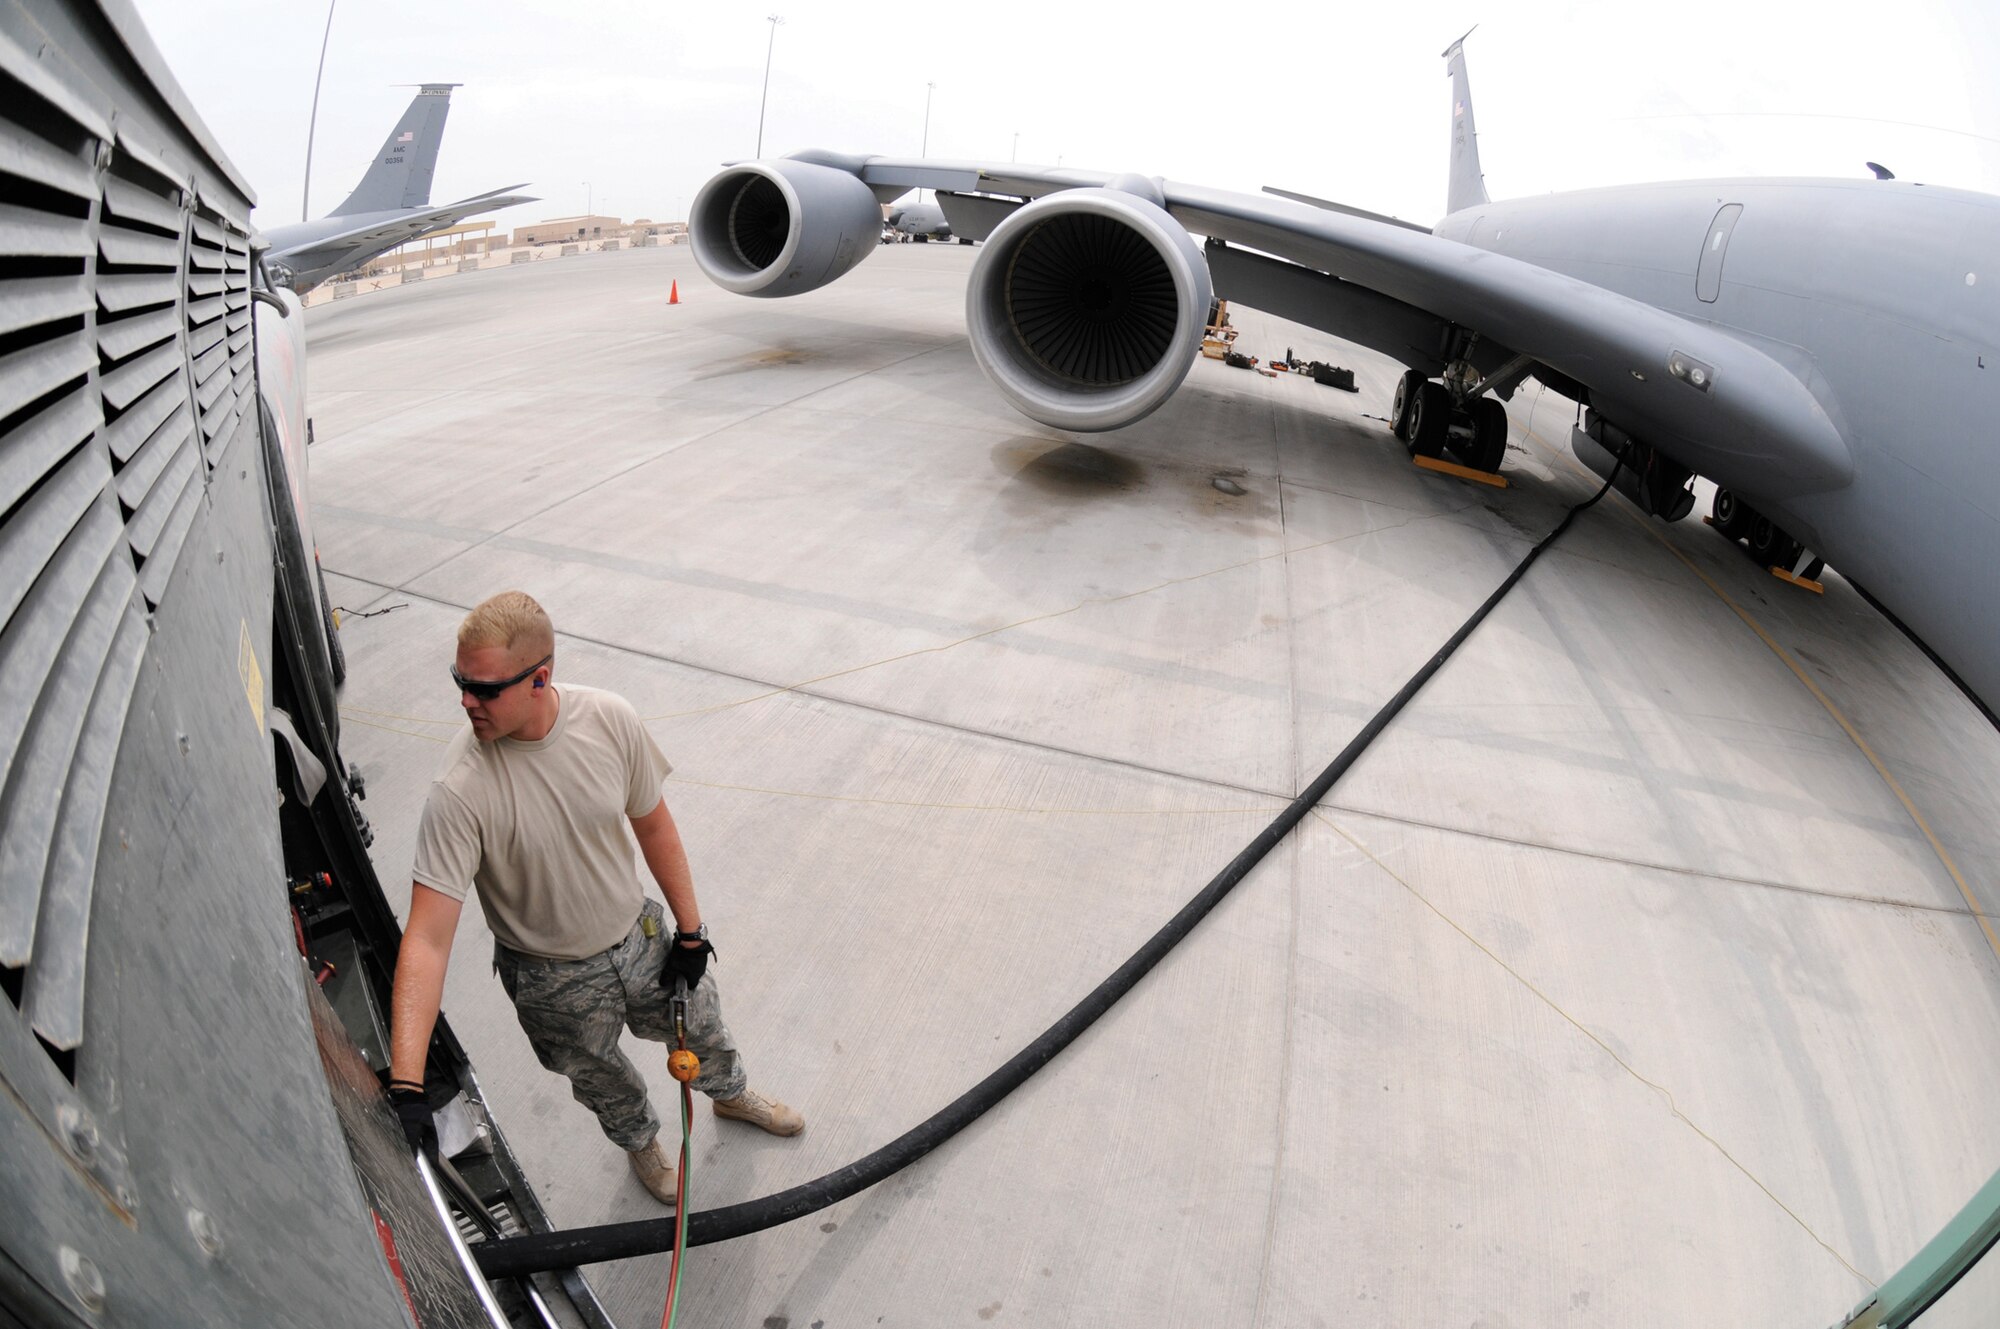 Airman 1st Class Bradley Dean, fuels apprentice assigned to the 379th Expeditionary Logistics Readiness Squadron, checks over the gauges on his fuel truck while fueling a KC-135 Stratotanker, Nov. 4, 2008, at an undisclosed air base in Southwest Asia.  He keeps his attention on the crew chief of the aircraft and the gauges on his fuel truck.  Depending on the mission the KC-135 can hold four or five fuel trucks worth of fuel. Airman Dean is a native of Tennessee Colony, Texas, and deployed from Moody Air Force Base, Ga. (U.S. Air Force photo by Tech. Sgt. Michael Boquette)